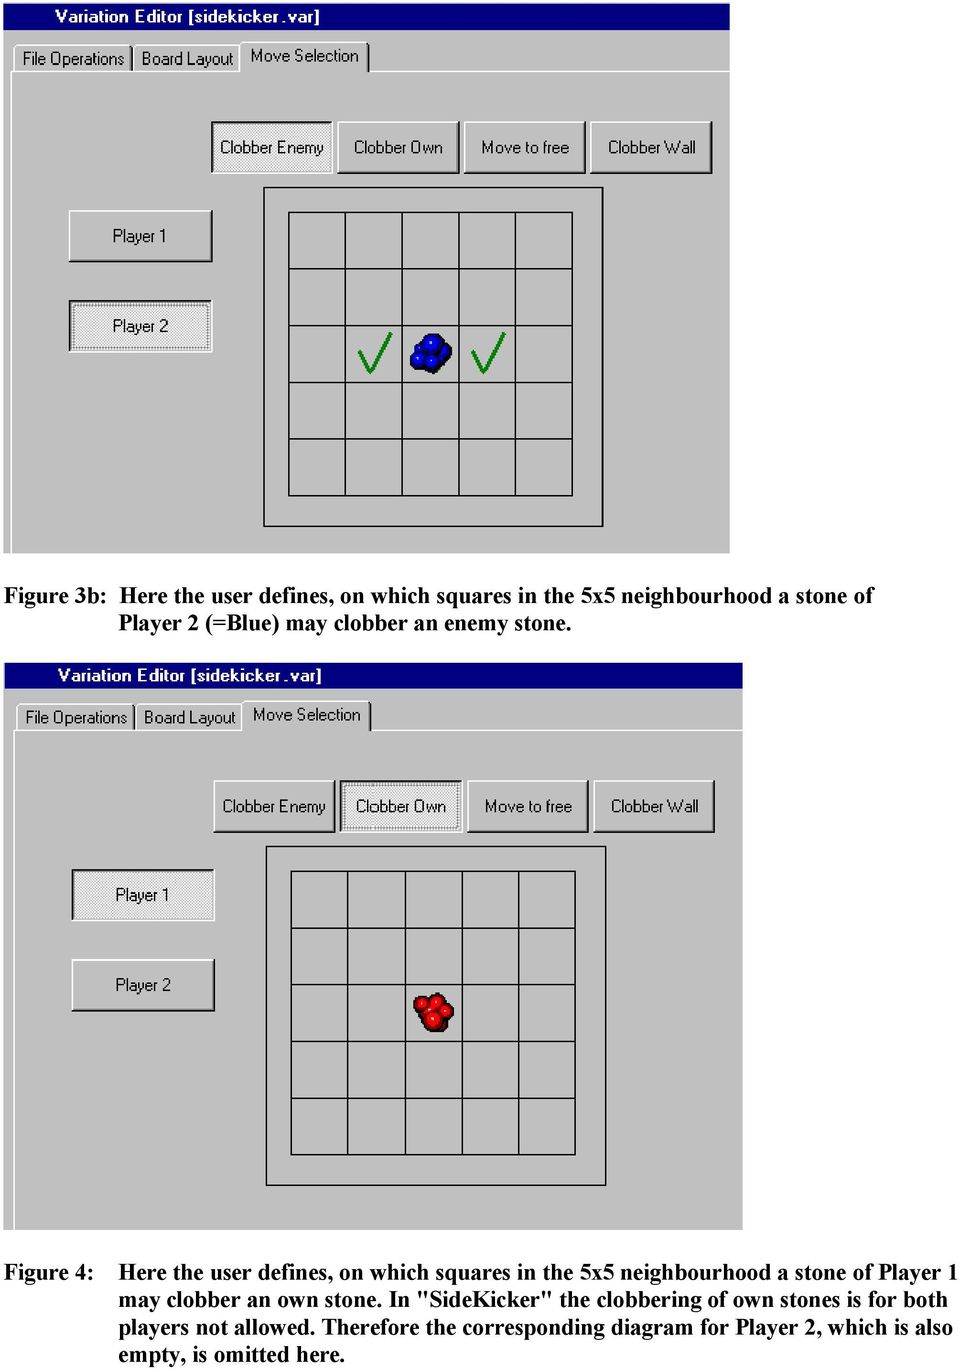 Figure 4: Here the user defines, on which squares in the 5x5 neighbourhood a stone of Player 1 may